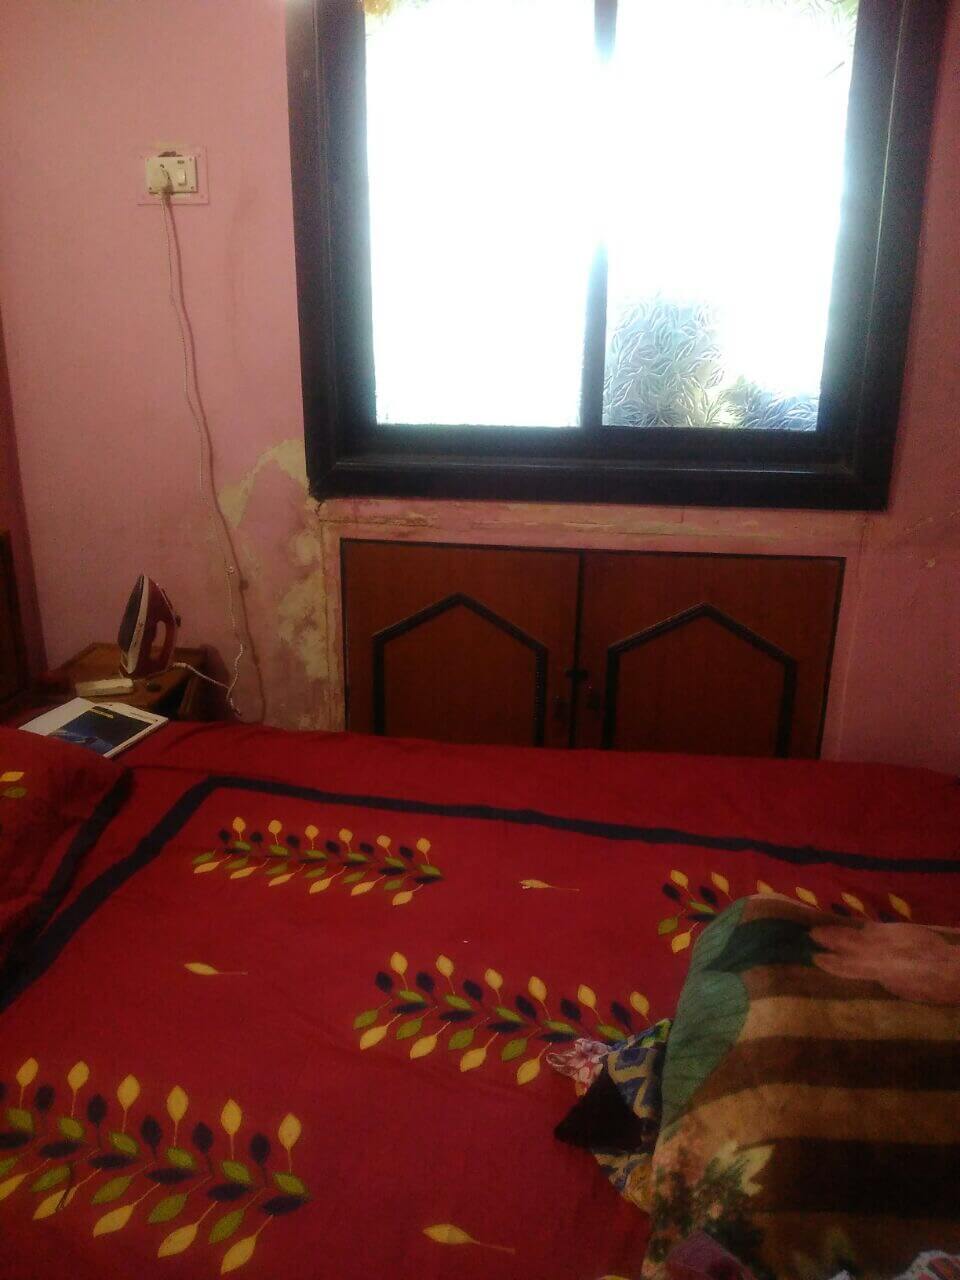 1 BHK flat avilable for rent in a peaceful locality for families and executives